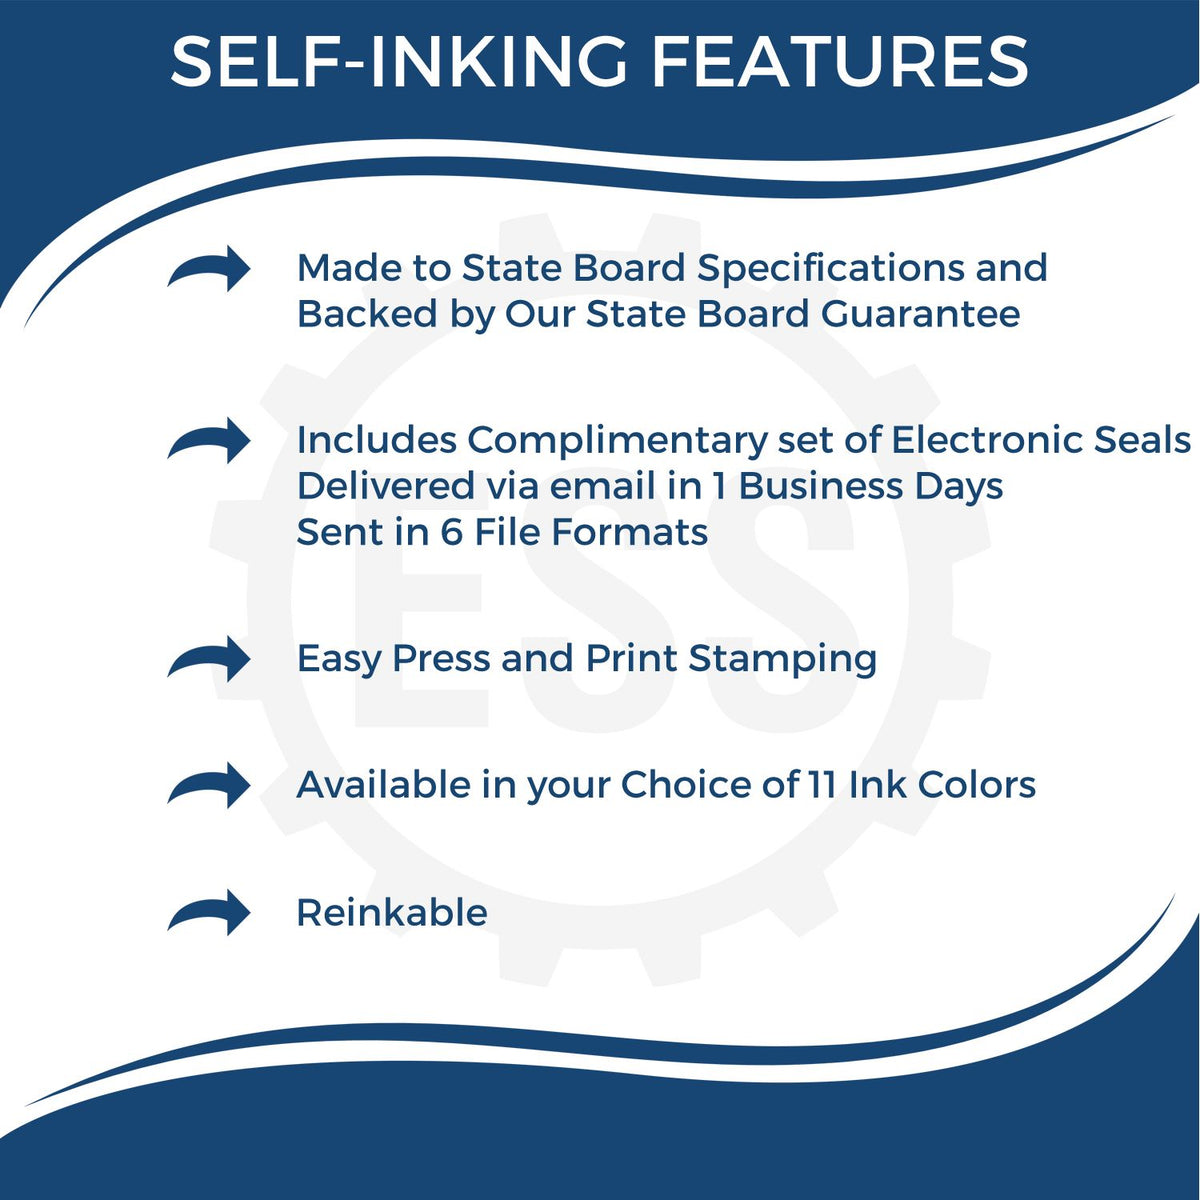 A picture of an infographic highlighting the selling points for the Self-Inking Rectangular Georgia Notary Stamp